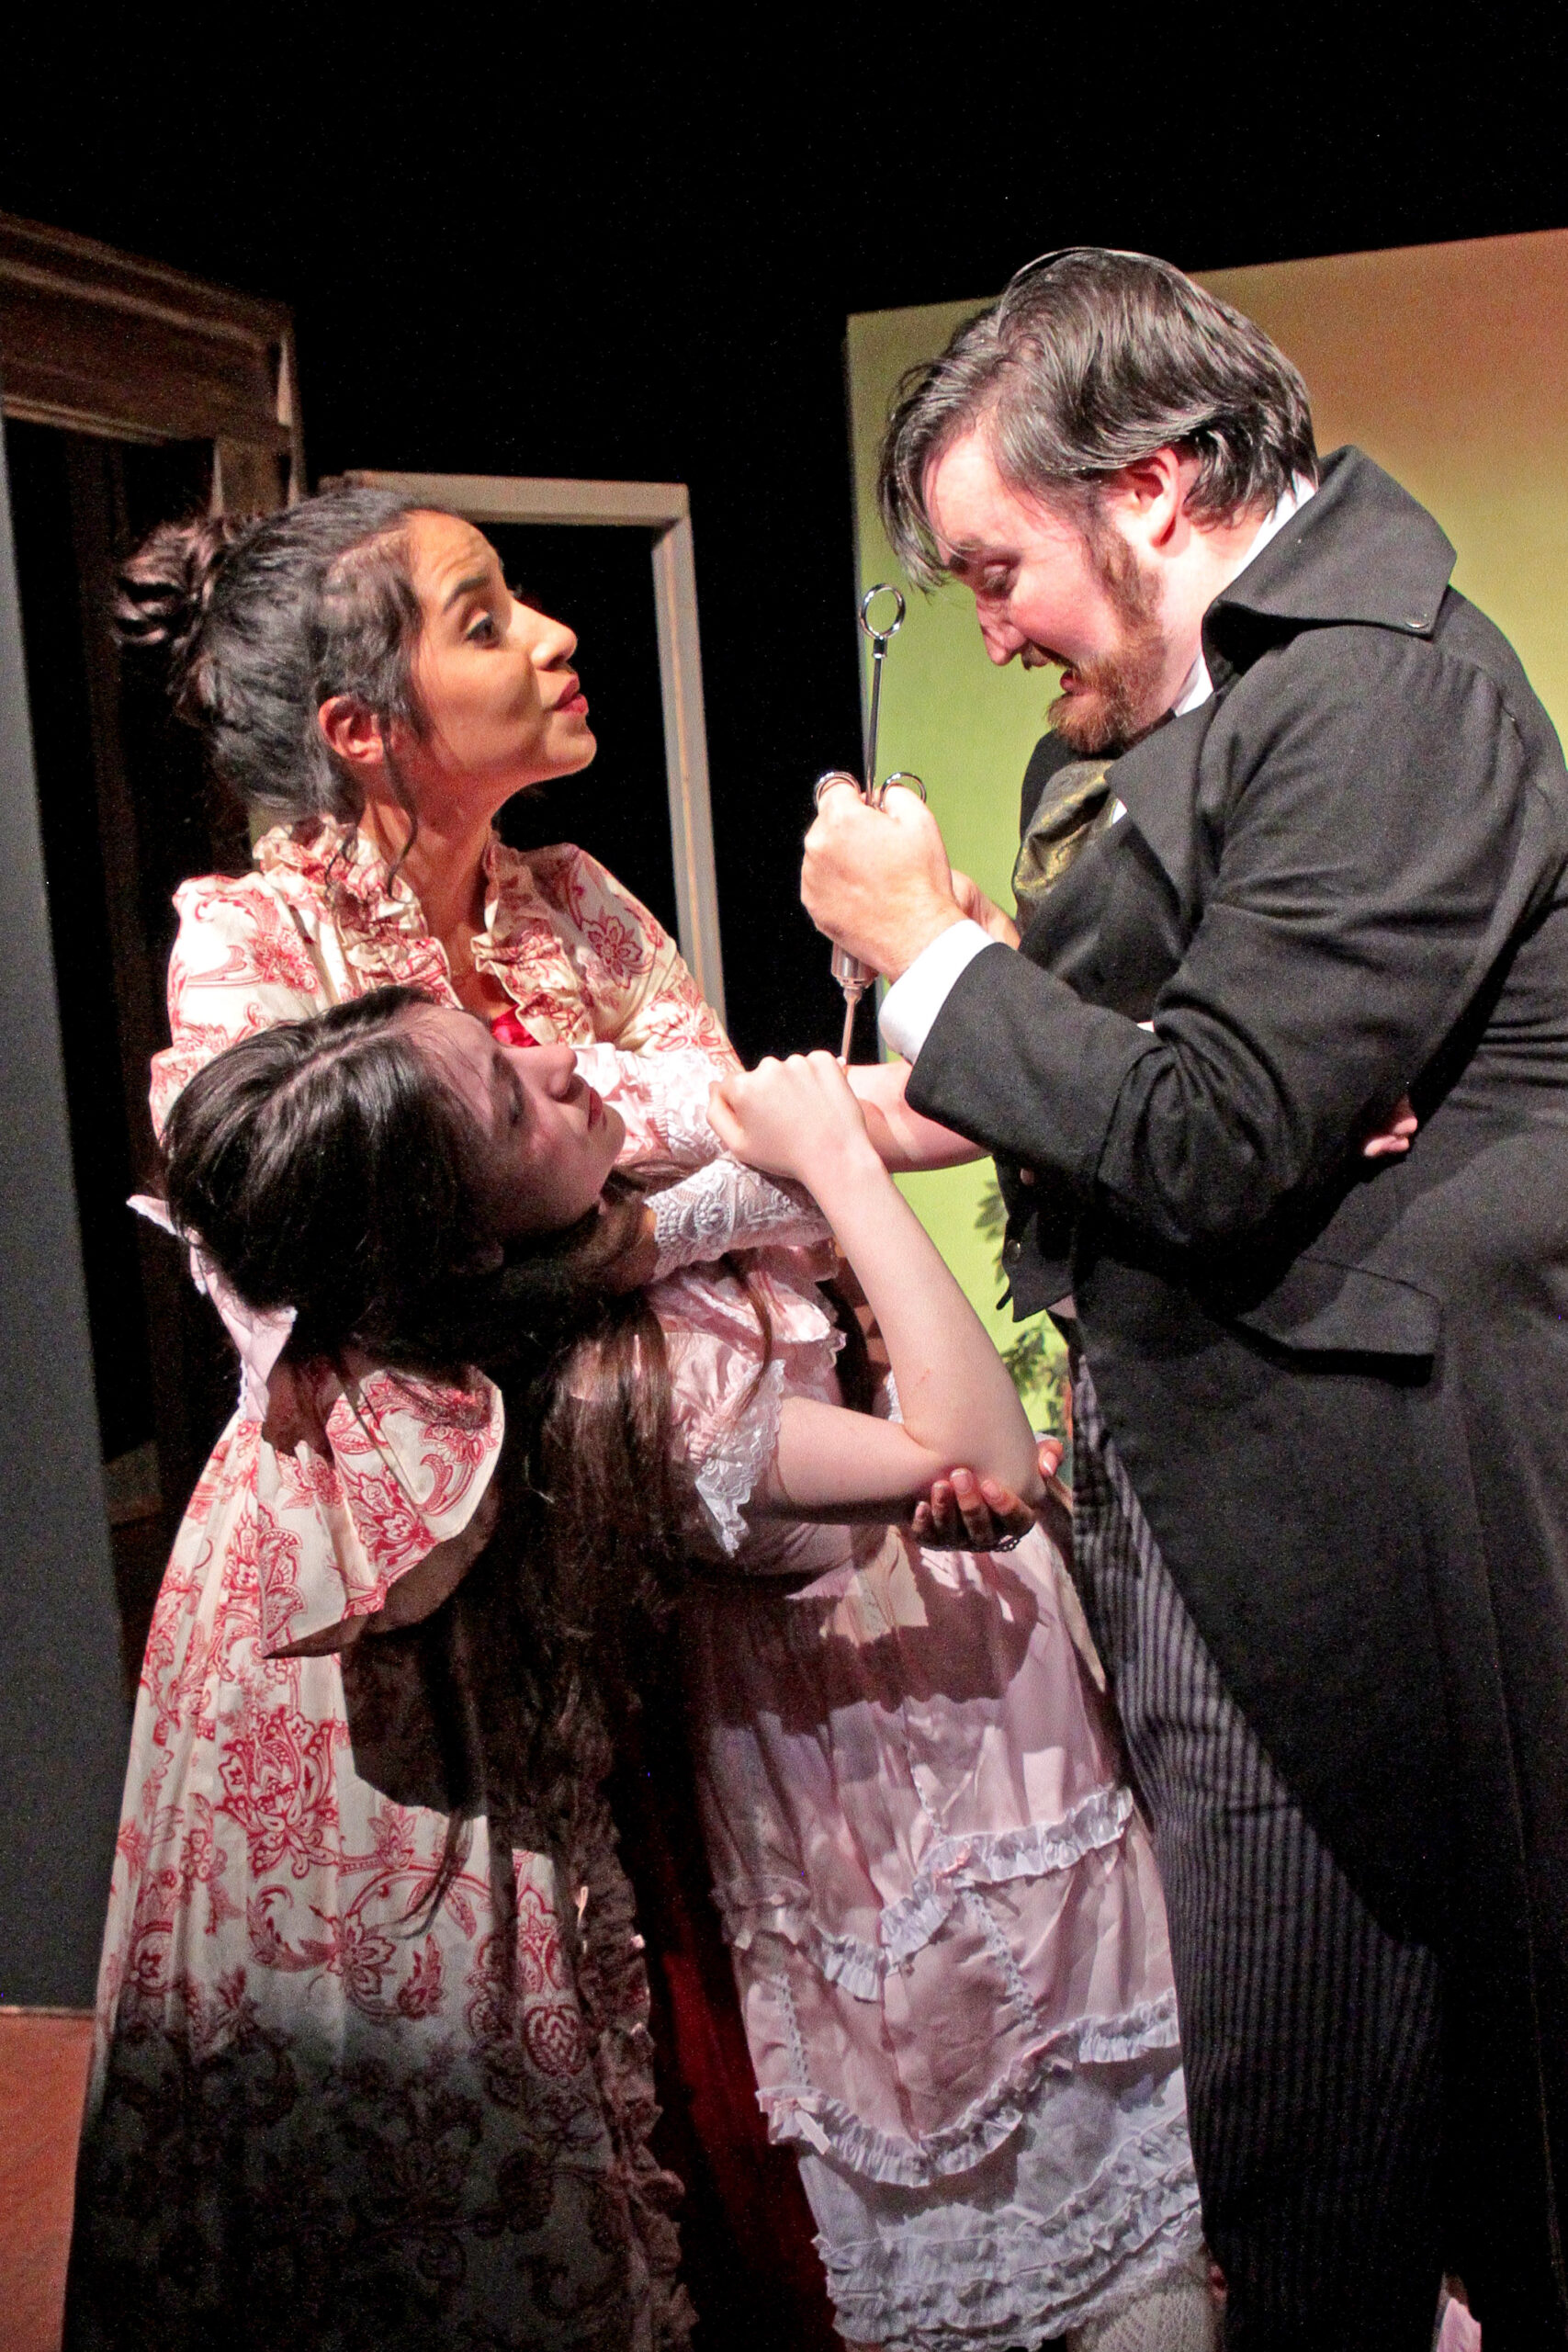 Boots on the Ground Theater's production of “Chemical Imbalance: A Jekyll & Hyde Play” runs October 14 to 30 at SCC. TOM KOCHIE